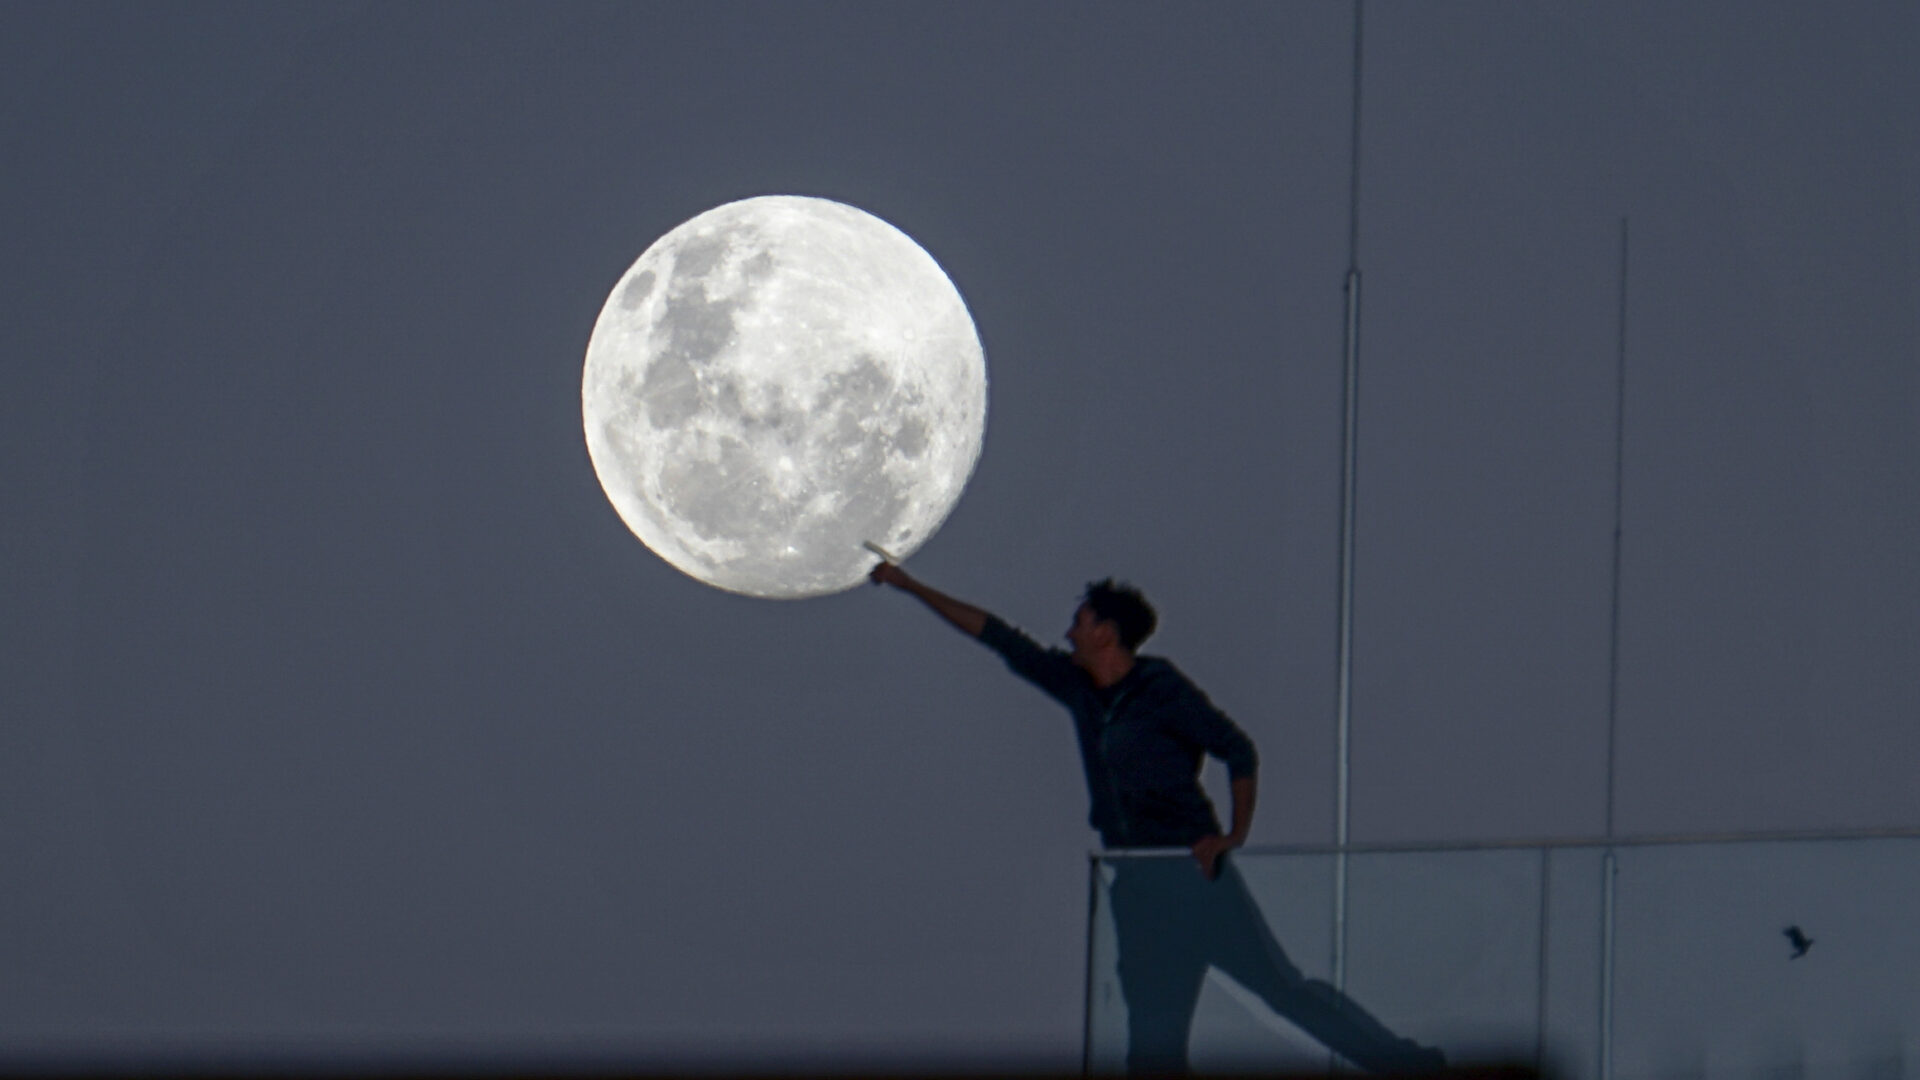 Touching the Moon